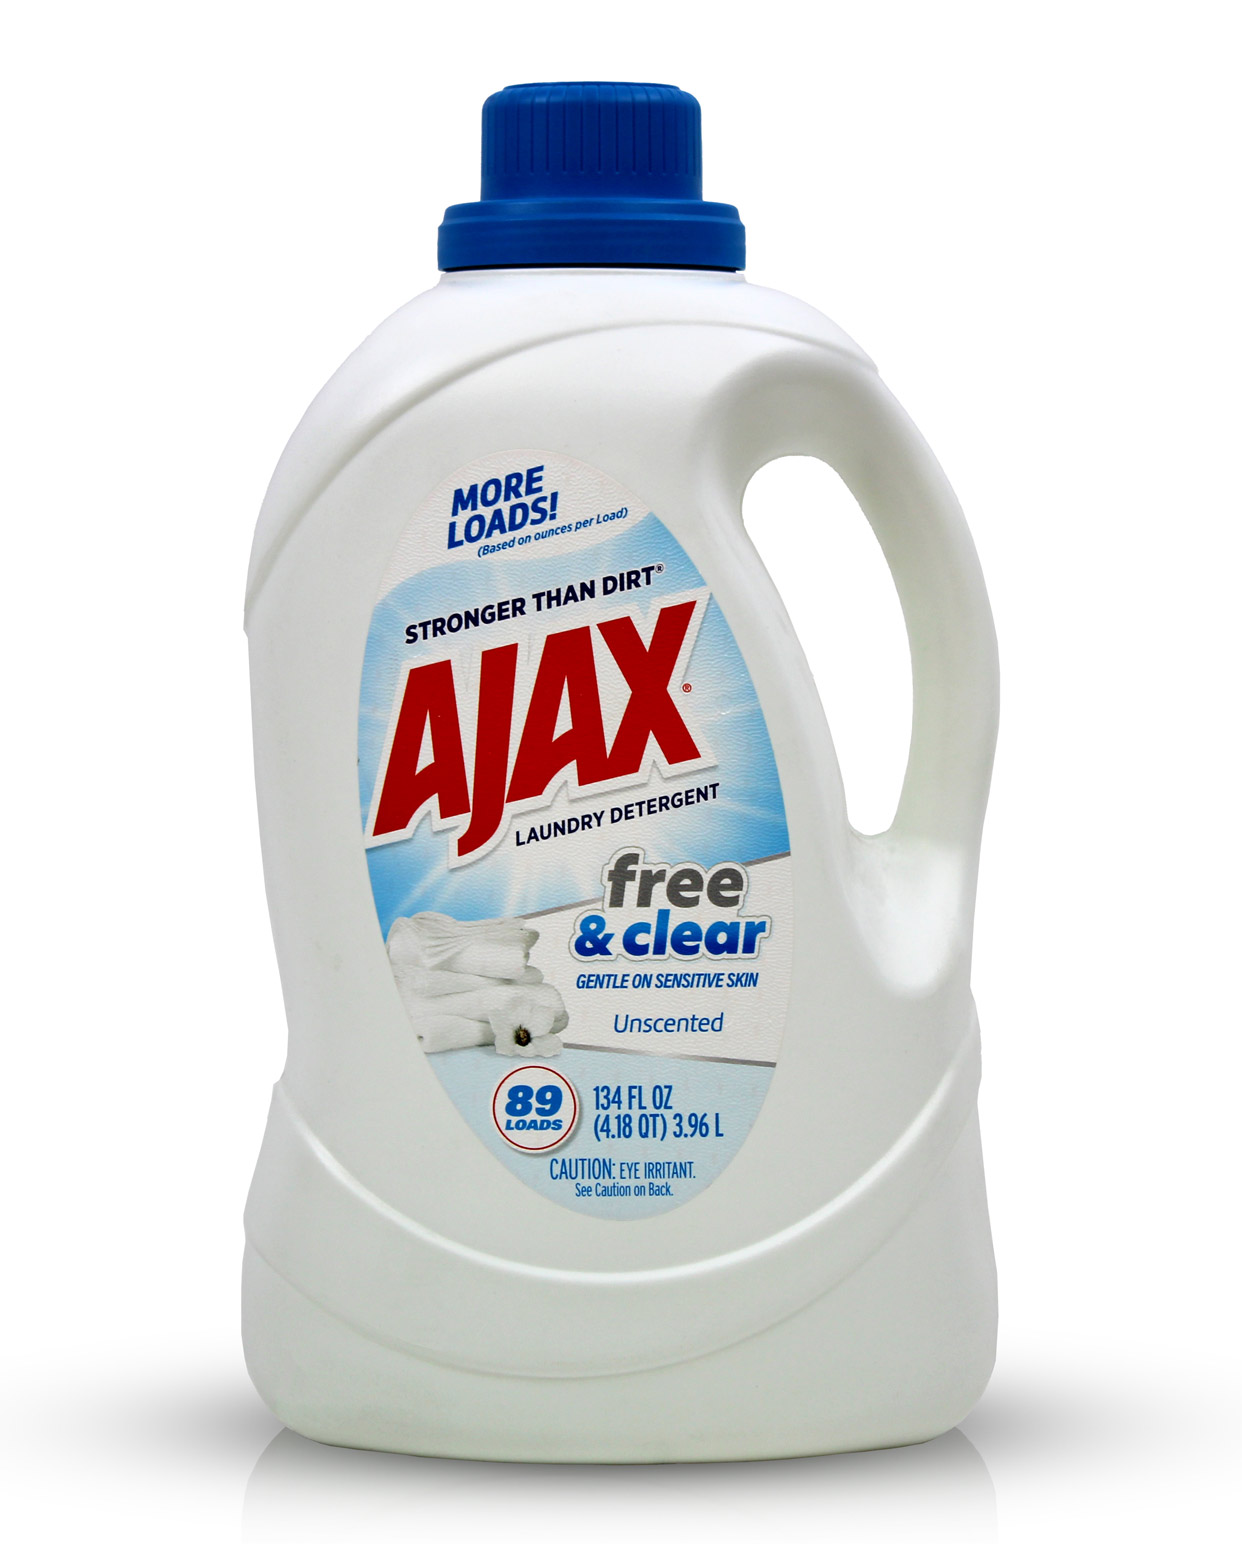 134oz bottle of AJAX Gentle laundry detergent liquid with a clear label.